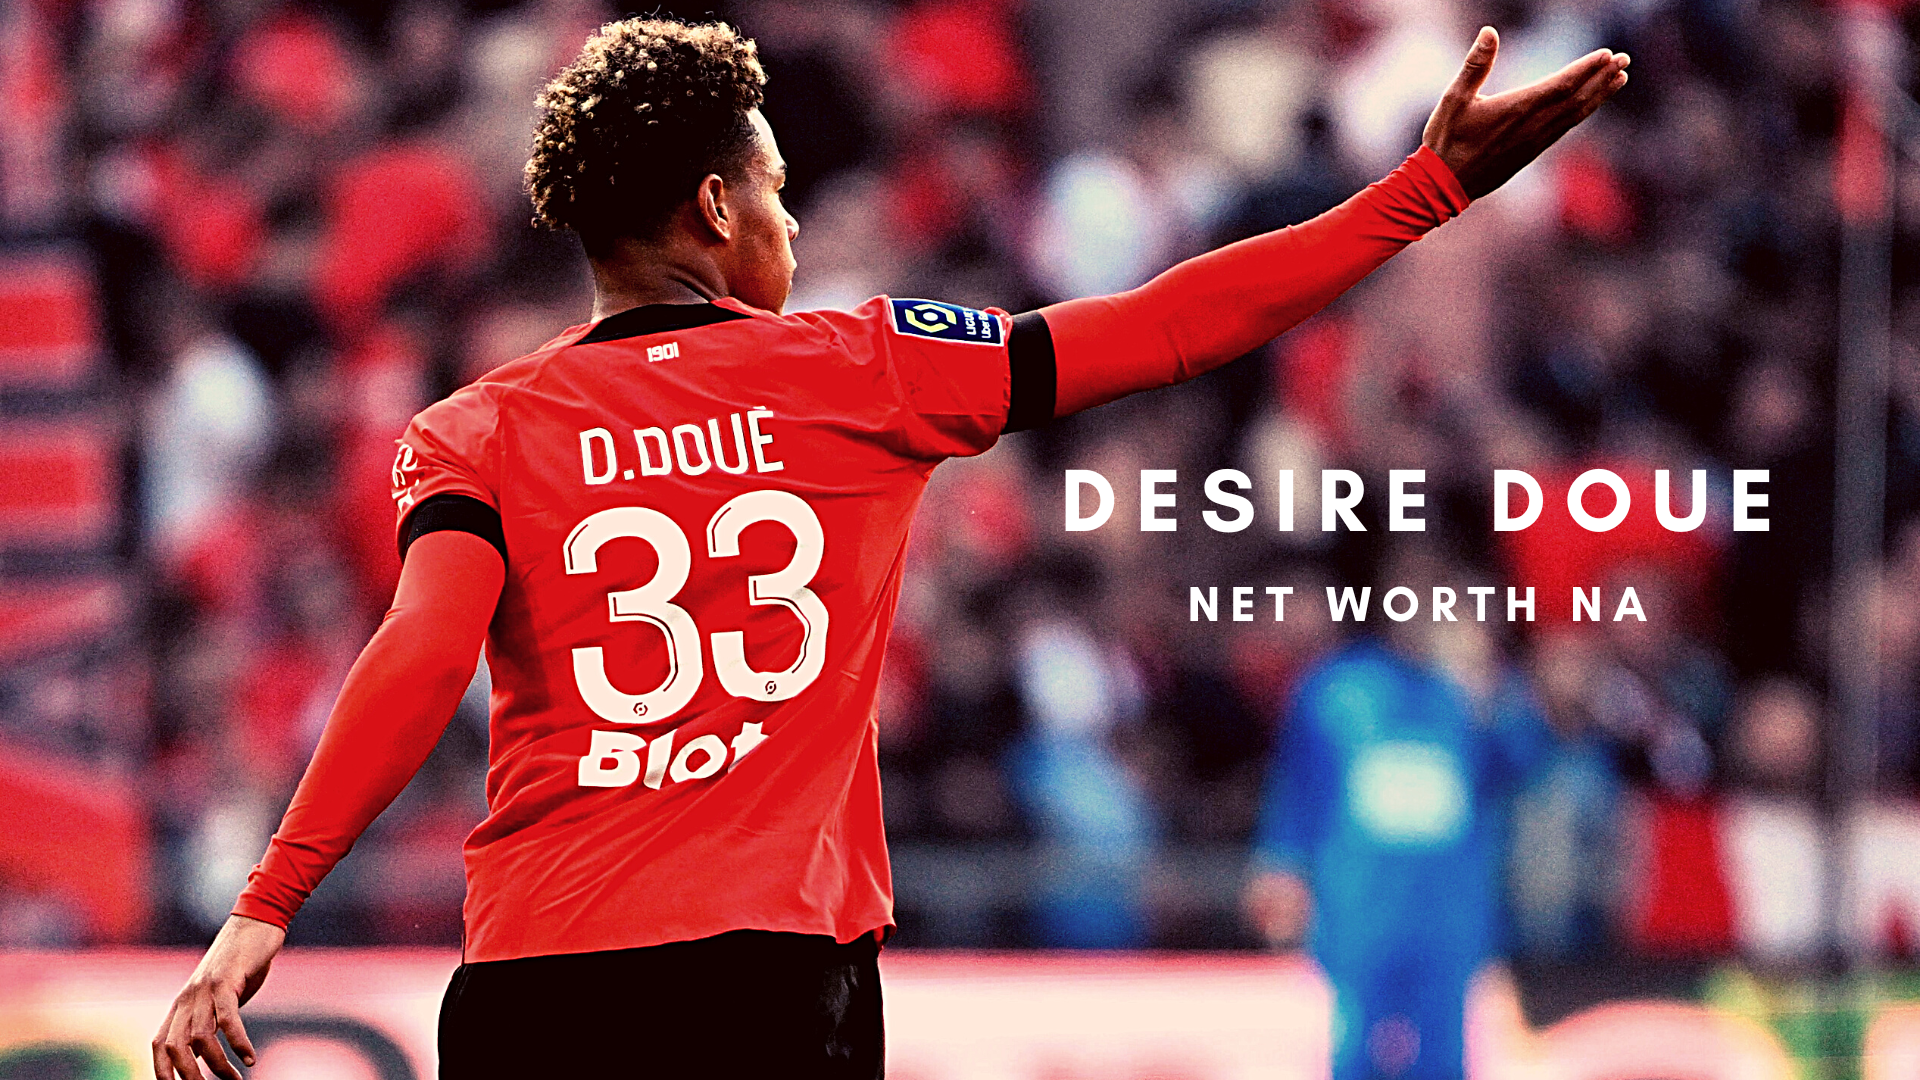 Rennes' French midfielder Desire Doue celebrates scoring his team's third goal during the French L1 football match between Stade Rennais FC and FC Nantes at The Roazhon Park Stadium in Rennes, western France. (Photo by Damien Meyer / AFP) (Photo by DAMIEN MEYER/AFP via Getty Images)